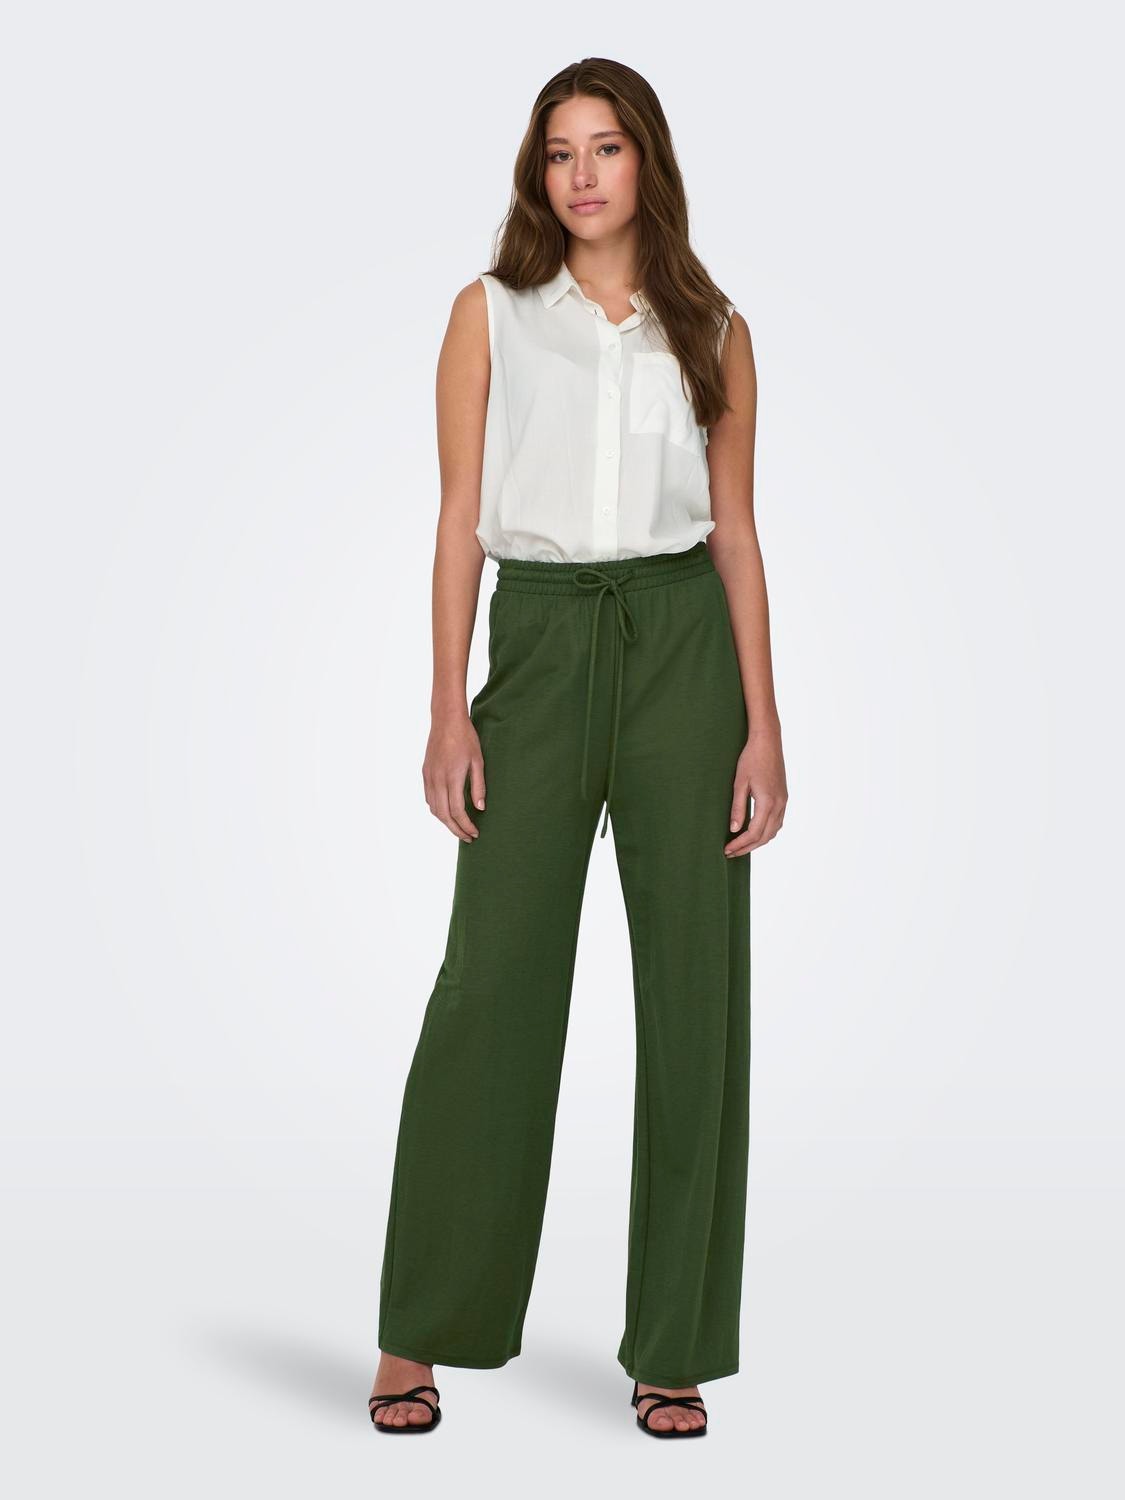 ONLY Regular Fit Trousers -Rifle Green - 15294429